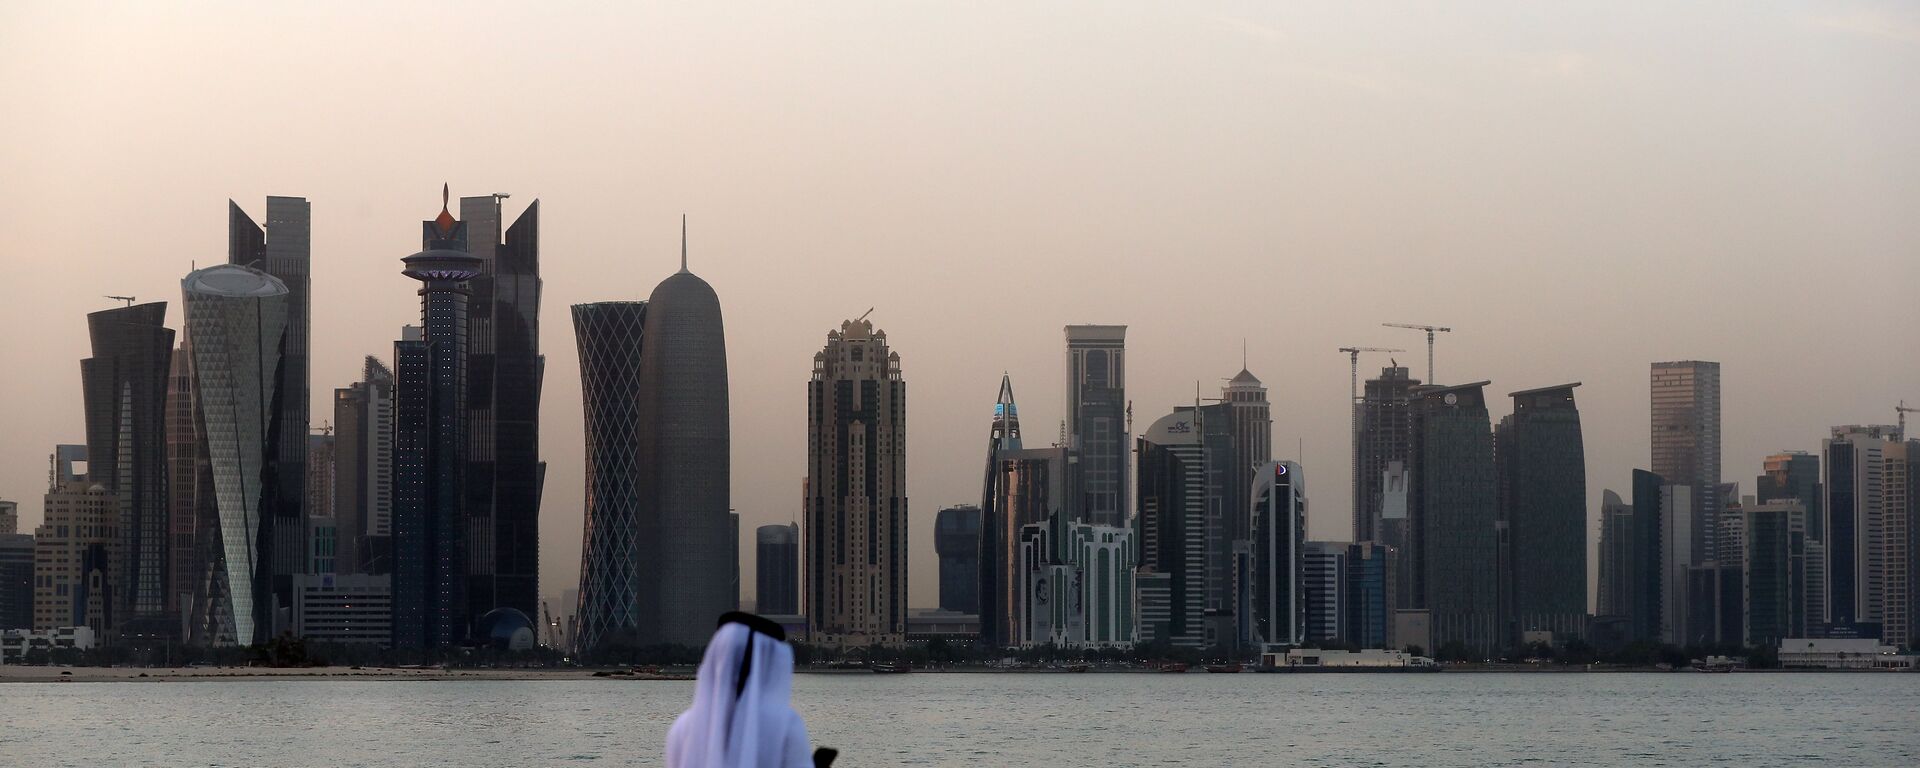 A man looks at his phone on the corniche in the Qatari capital Doha on July 2, 2017. - Sputnik Afrique, 1920, 24.11.2021